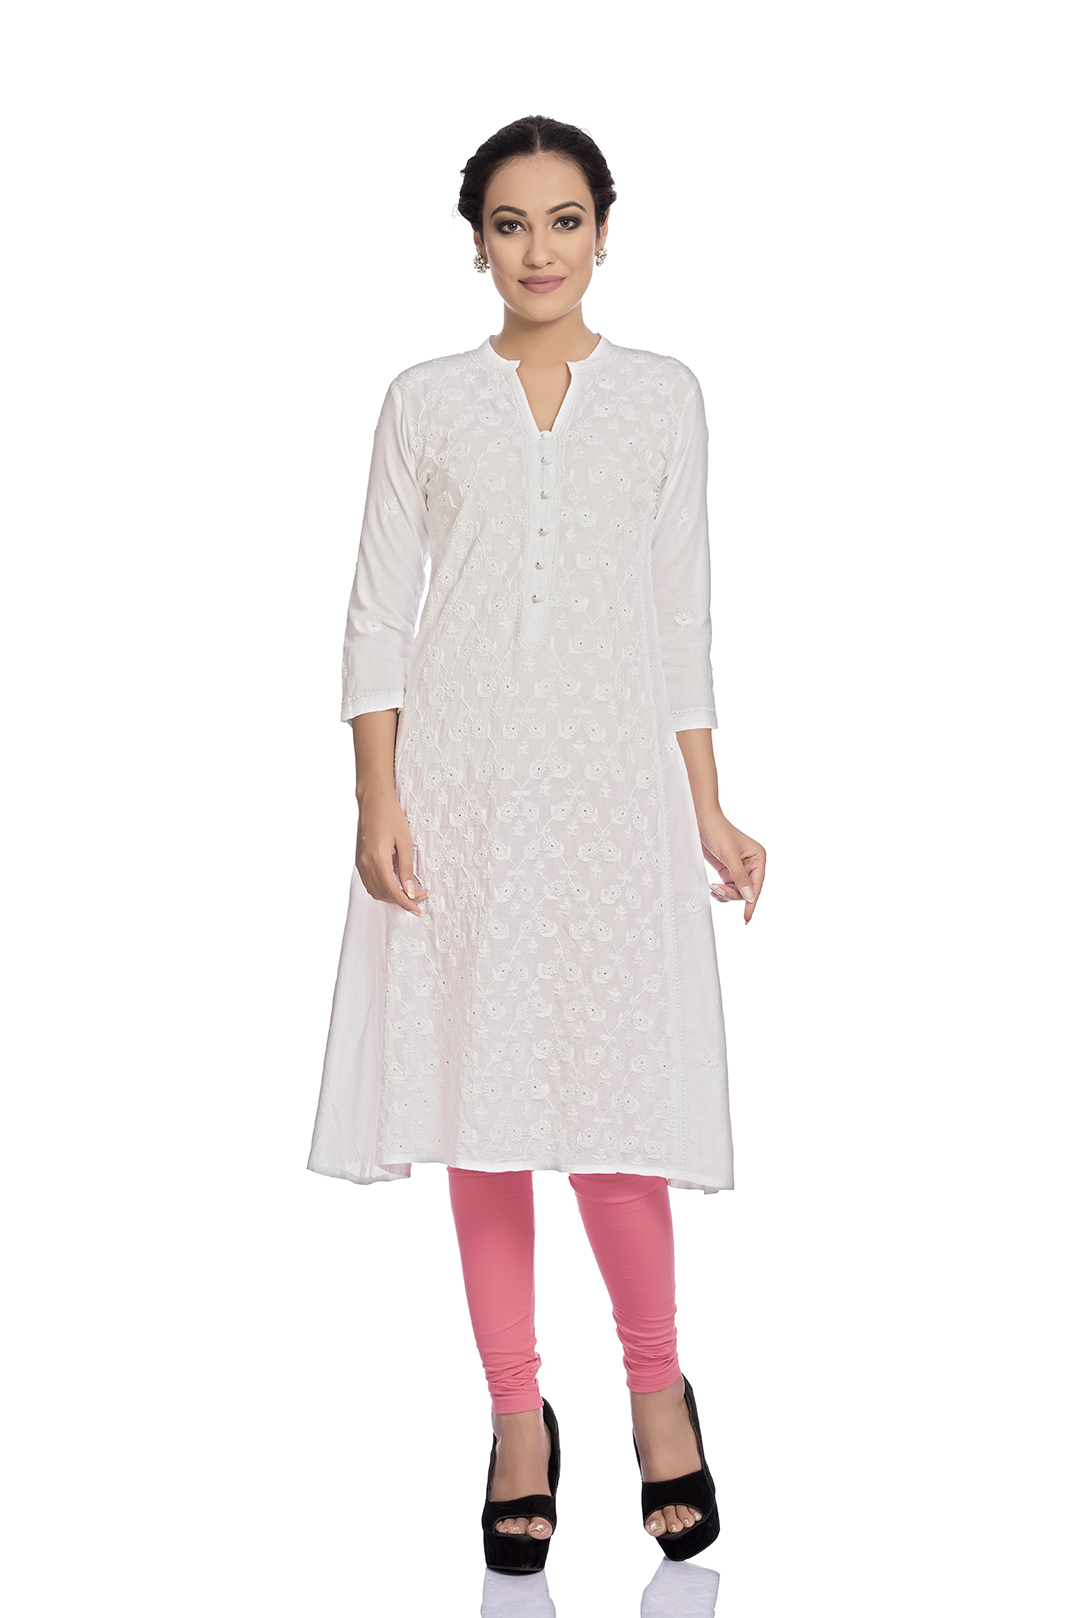 White And Pink Lucknow Chikan Latest Chiffon Kurti at Best Price in Lucknow  | Lucknow Chikan Art